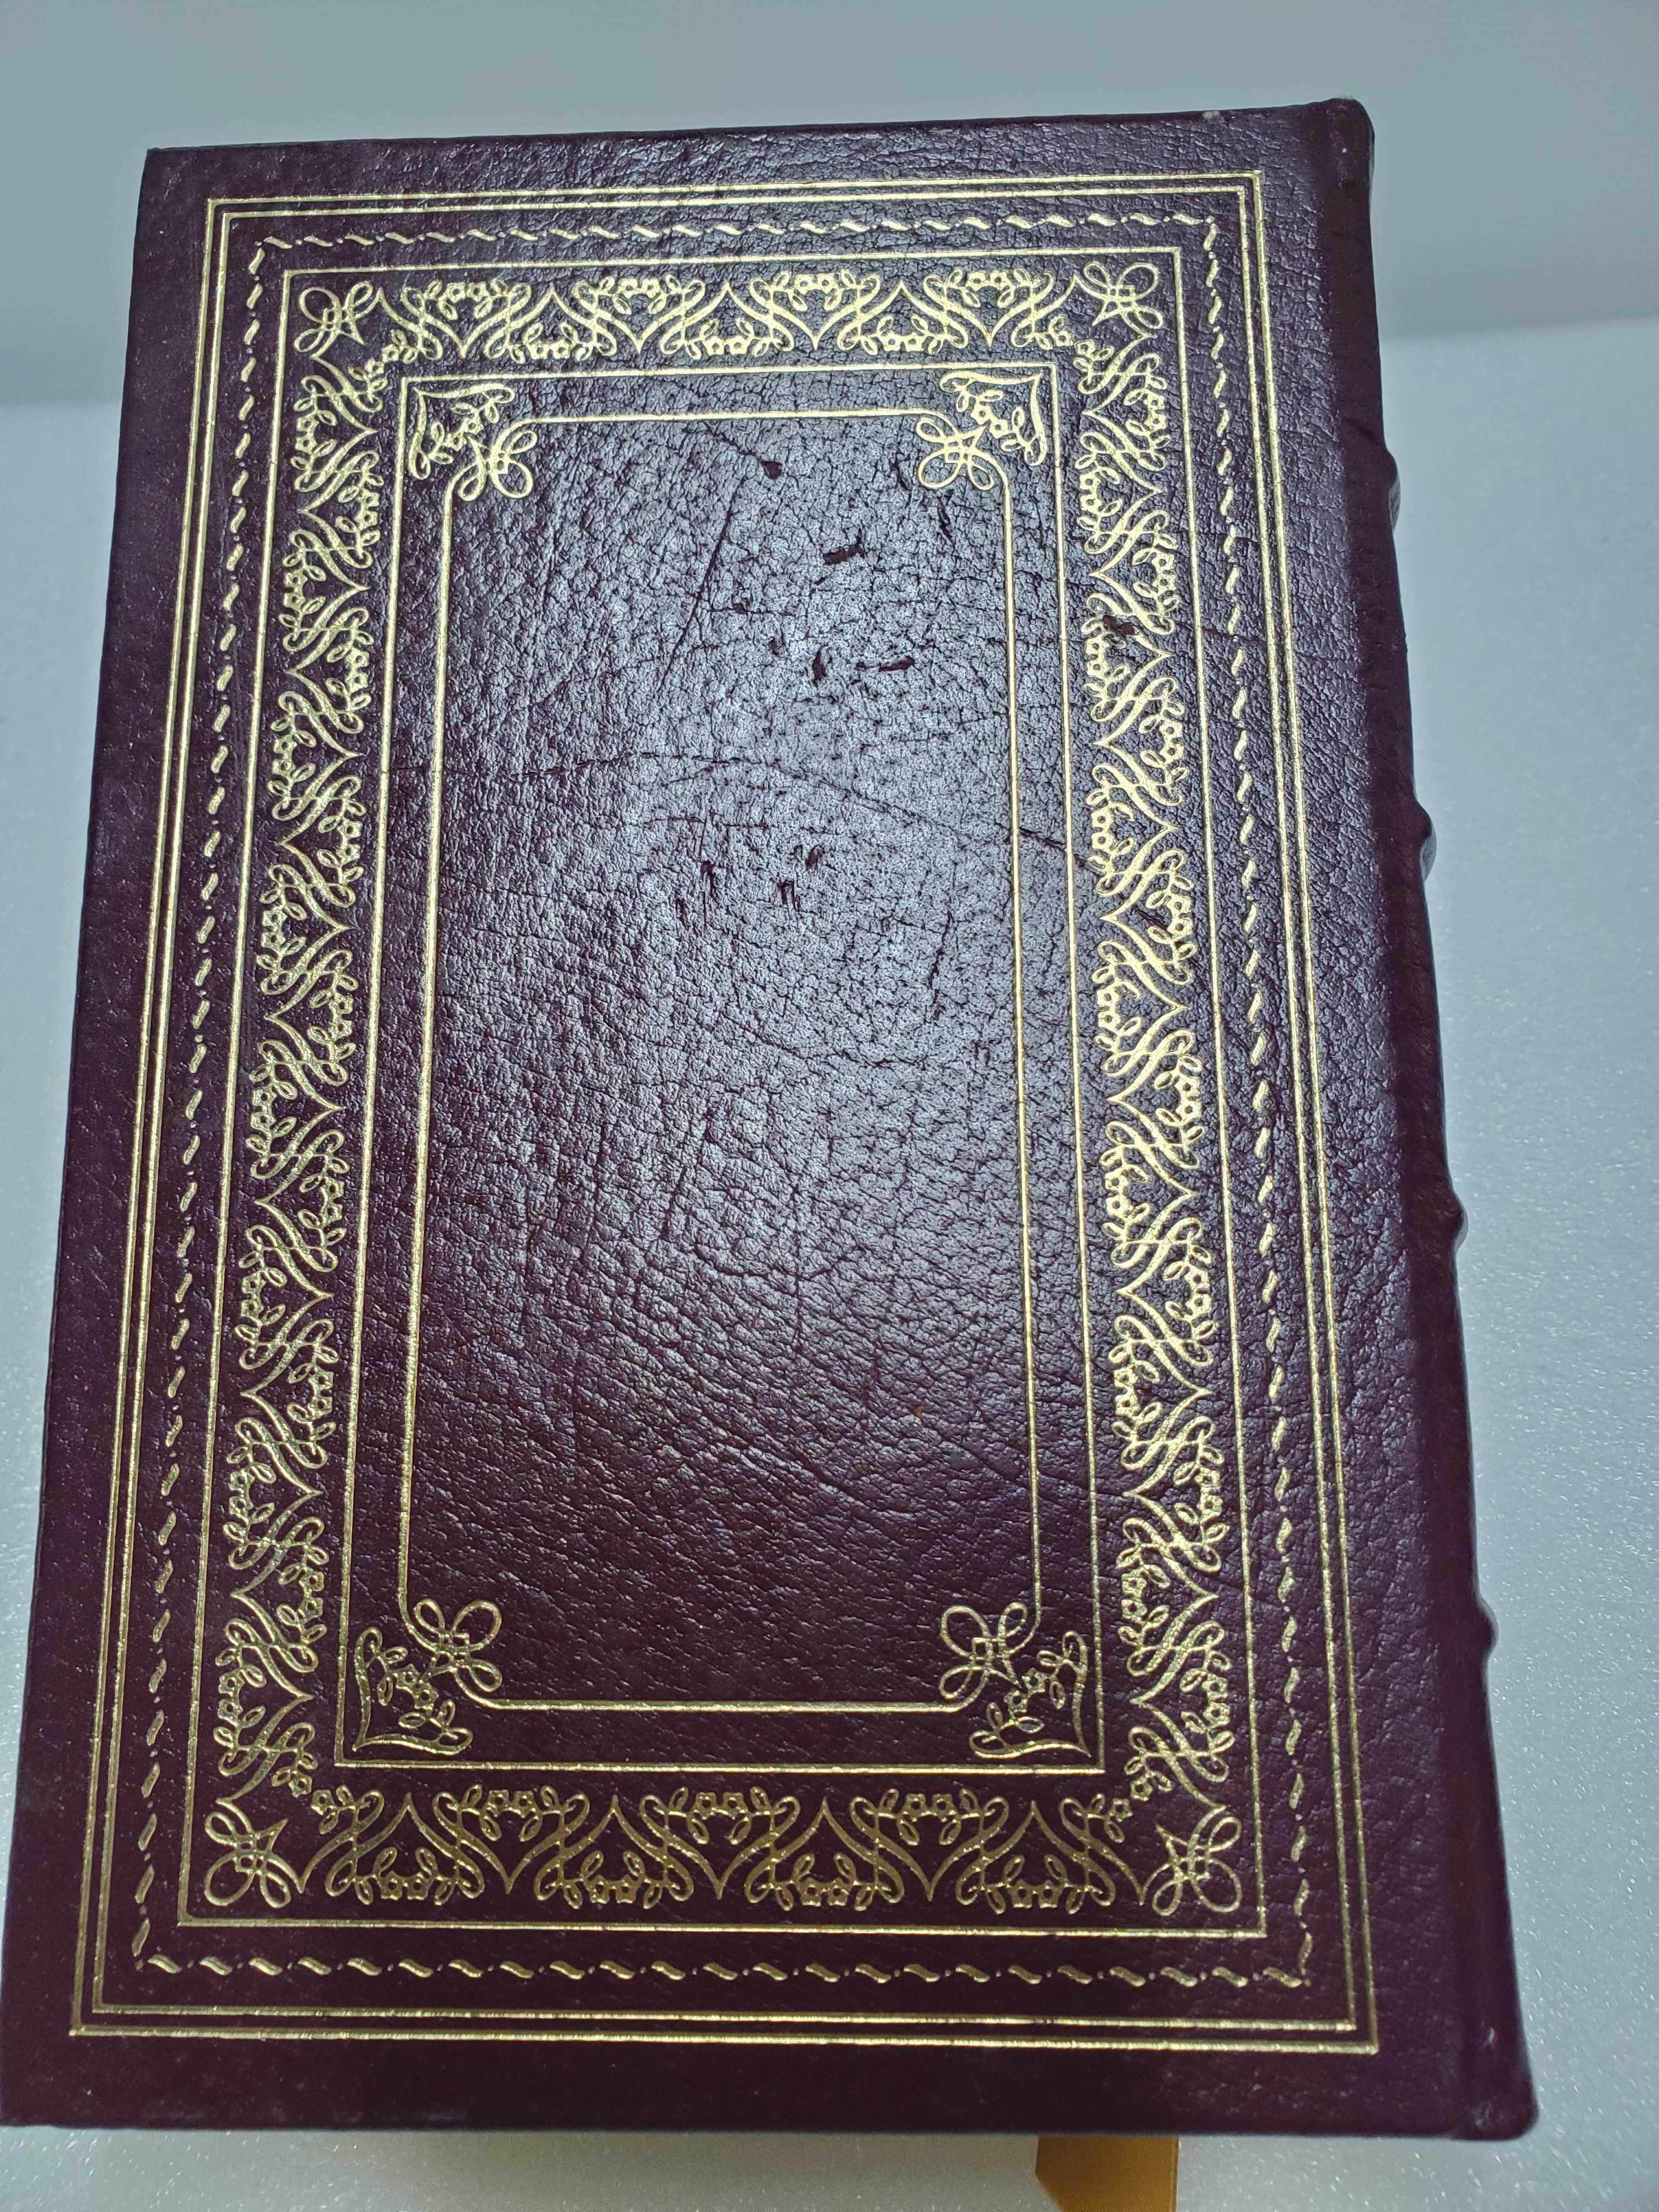 1988 Signed Limited Edition 4793/5000 Leather Bound Easton Press Shirely Temple "Child Star"